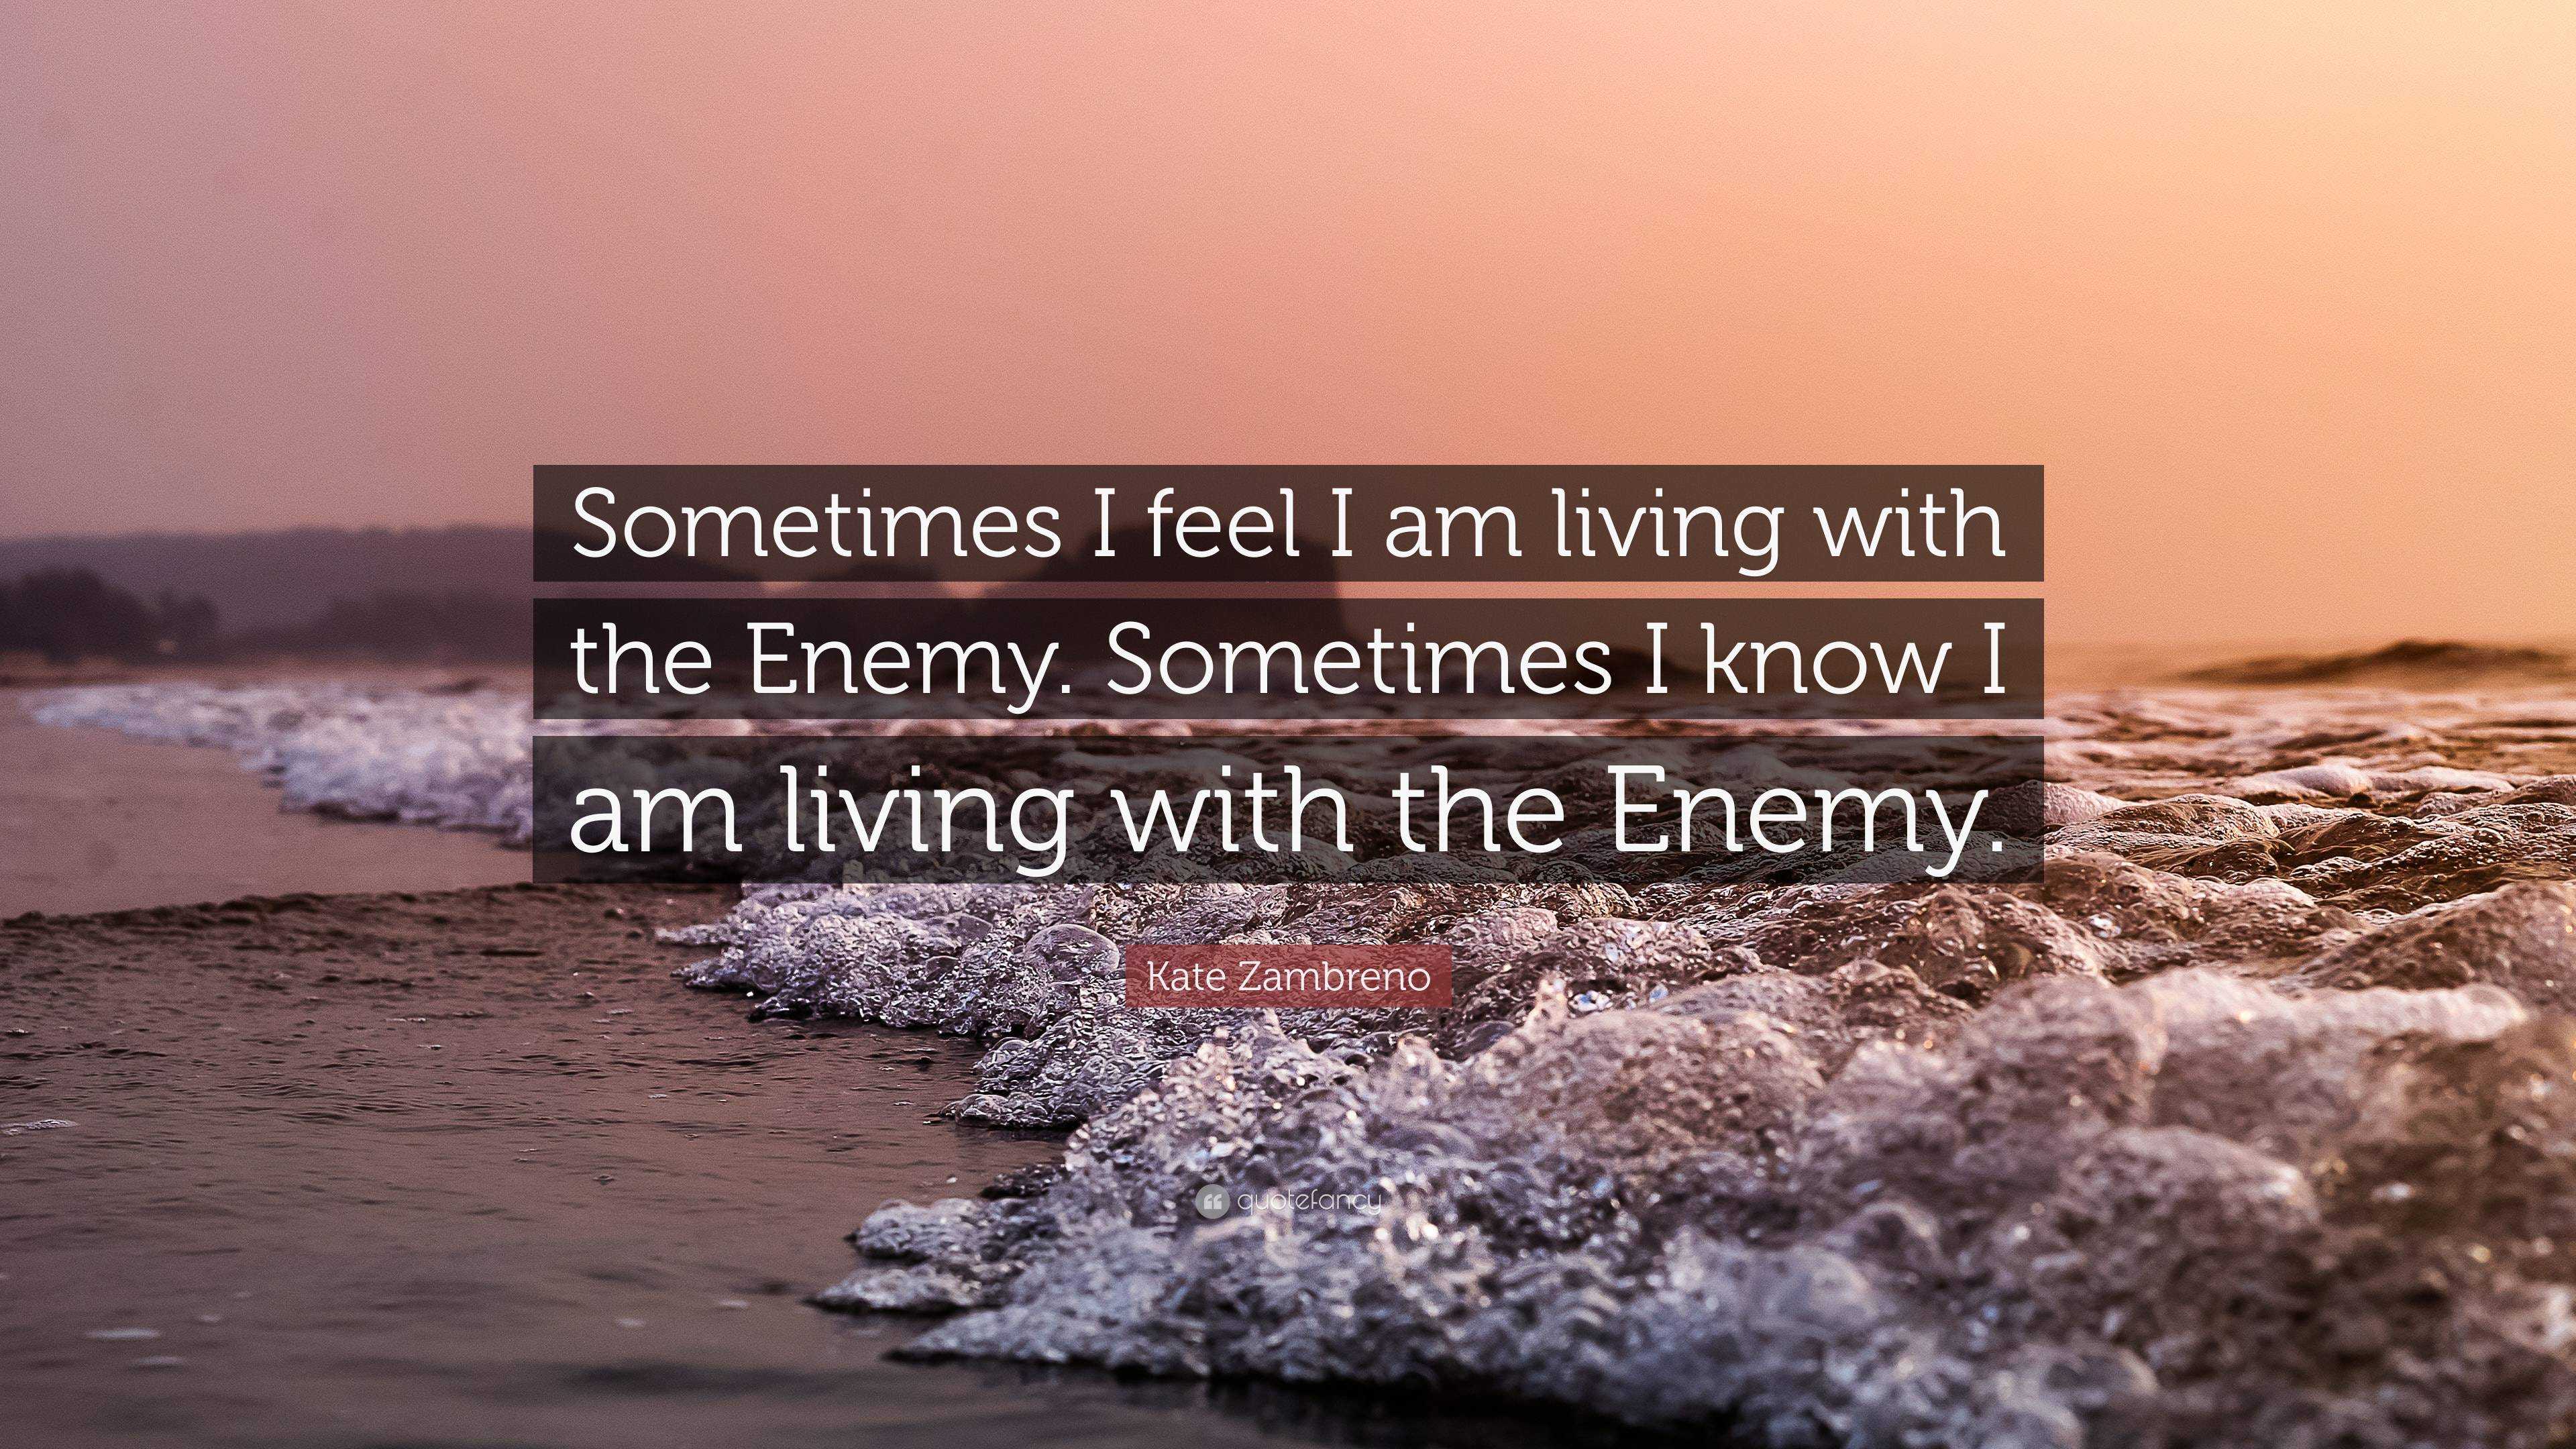 https://quotefancy.com/media/wallpaper/3840x2160/6619439-Kate-Zambreno-Quote-Sometimes-I-feel-I-am-living-with-the-Enemy.jpg